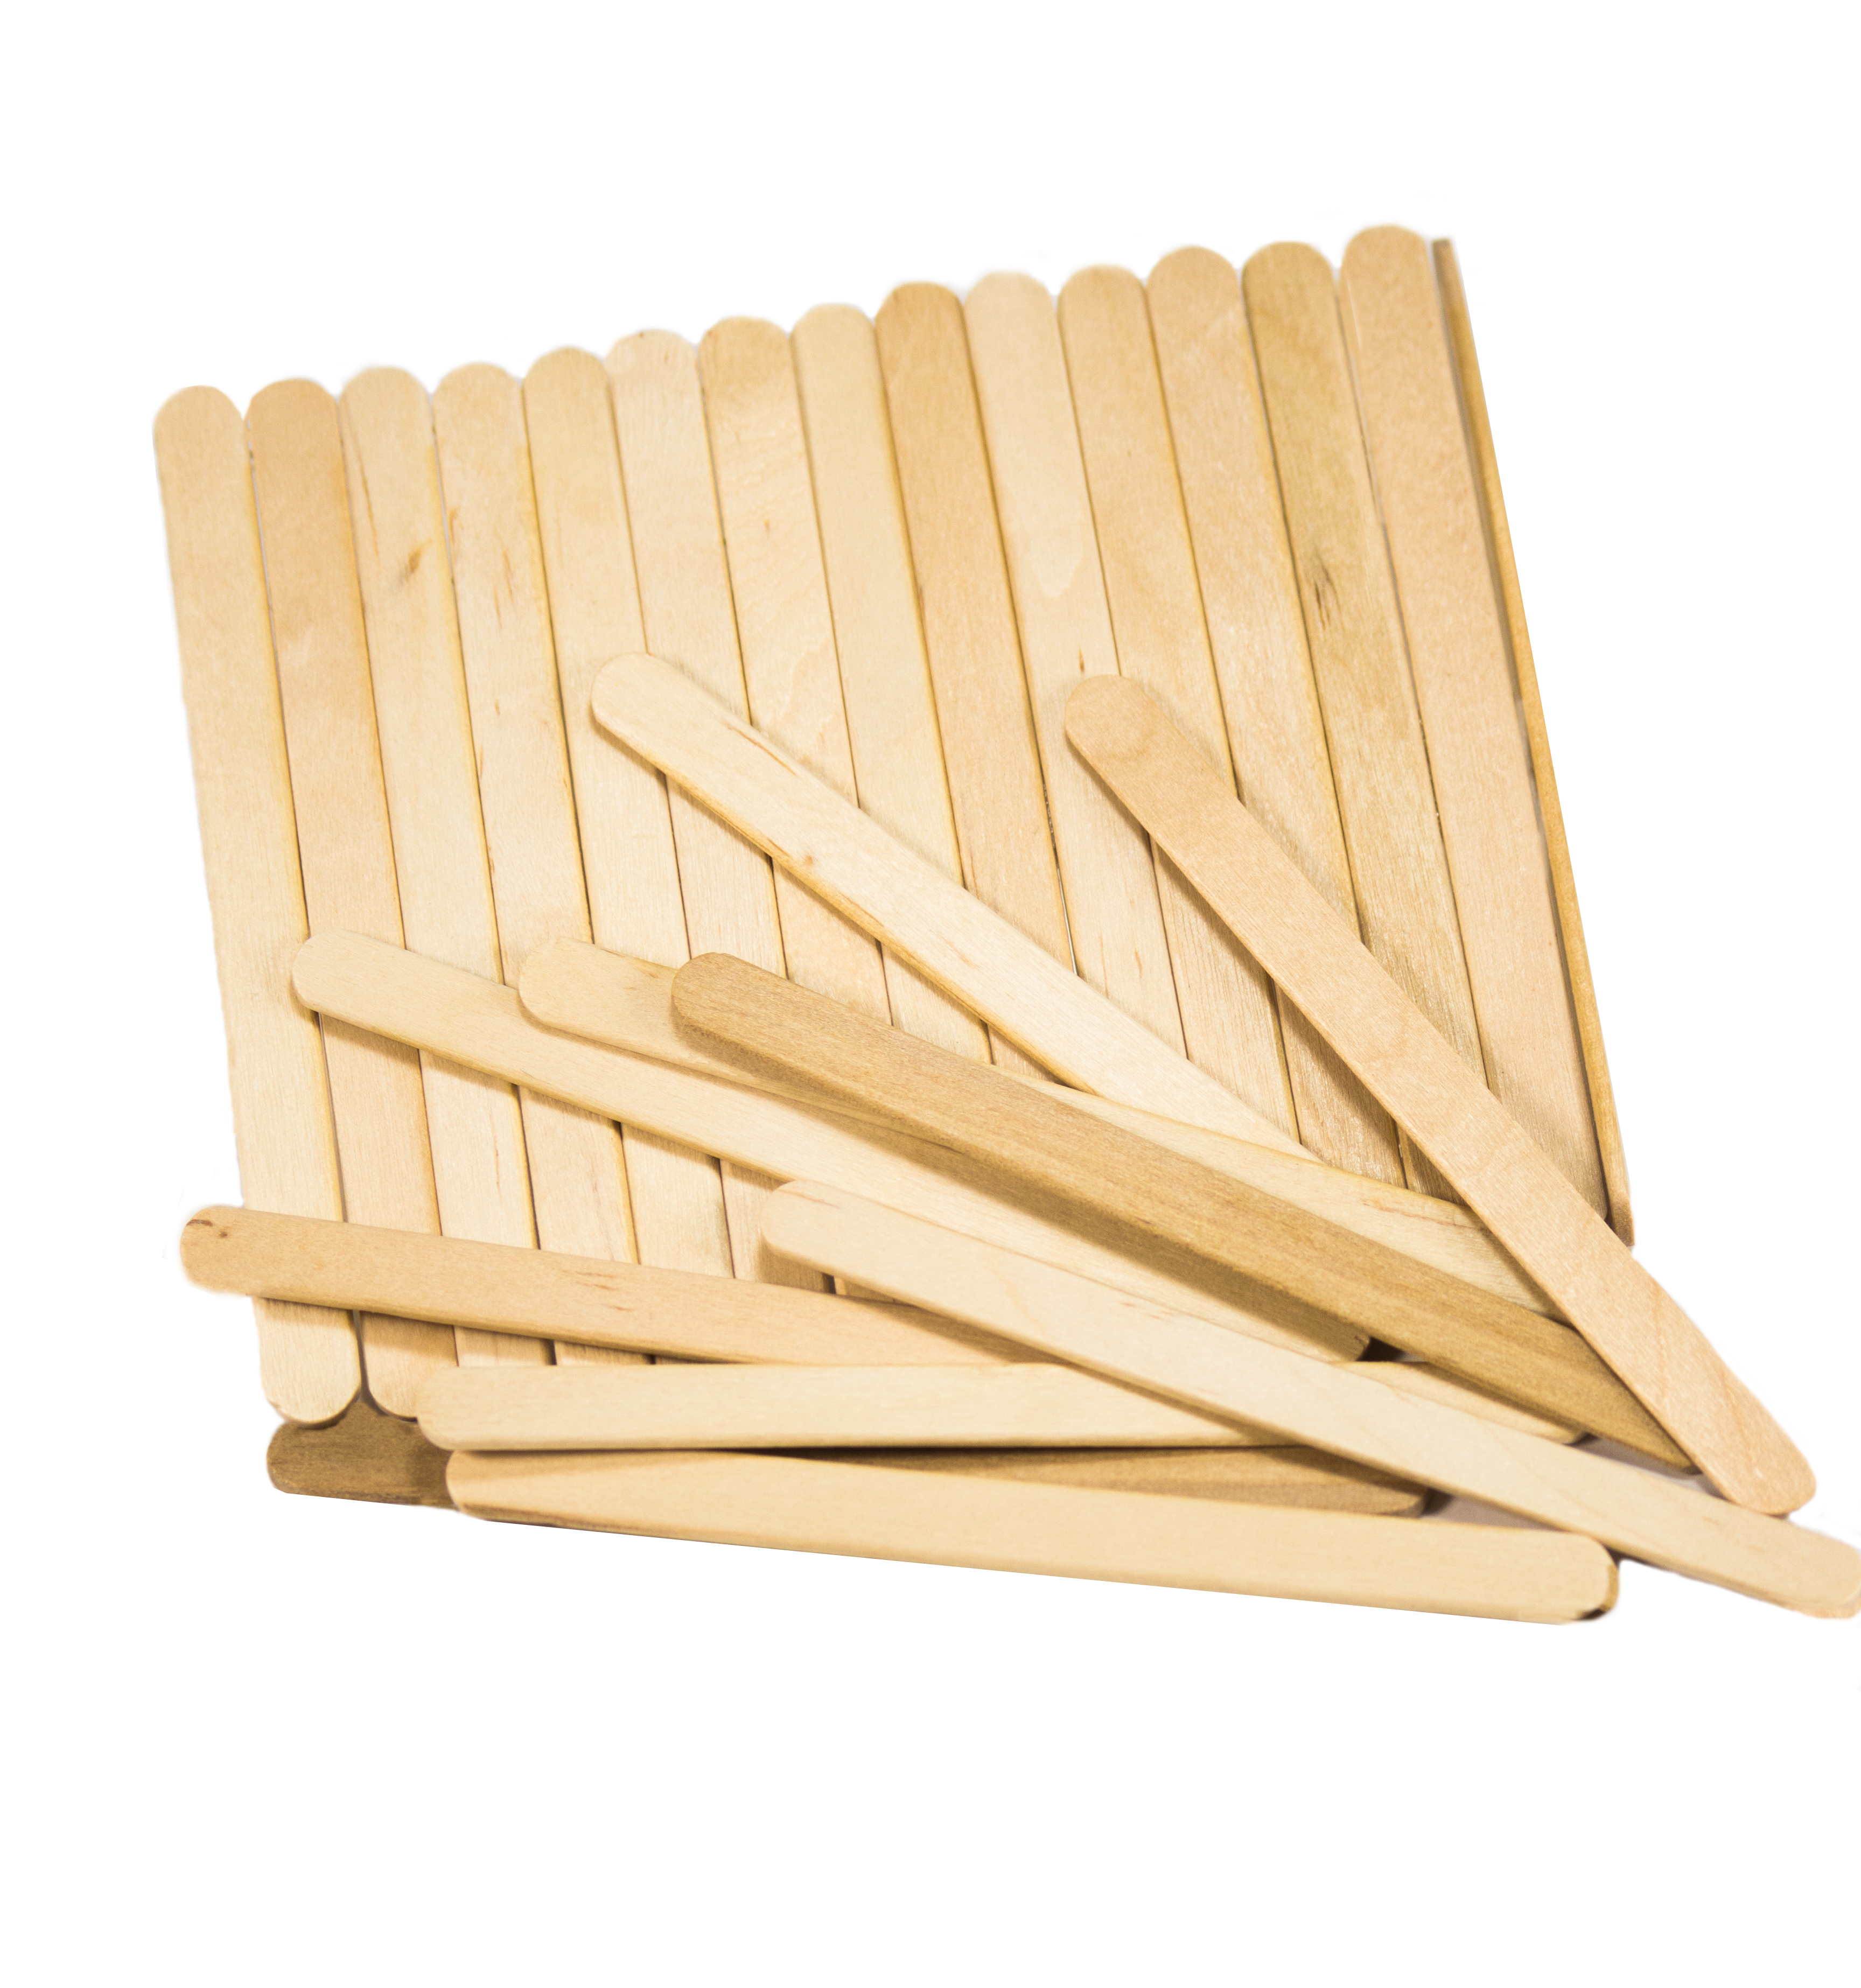 4 1/2" Banded Ice Cream Sticks Case of 200/ 50ct bands= 10,000ct (Item# ASO910BA)